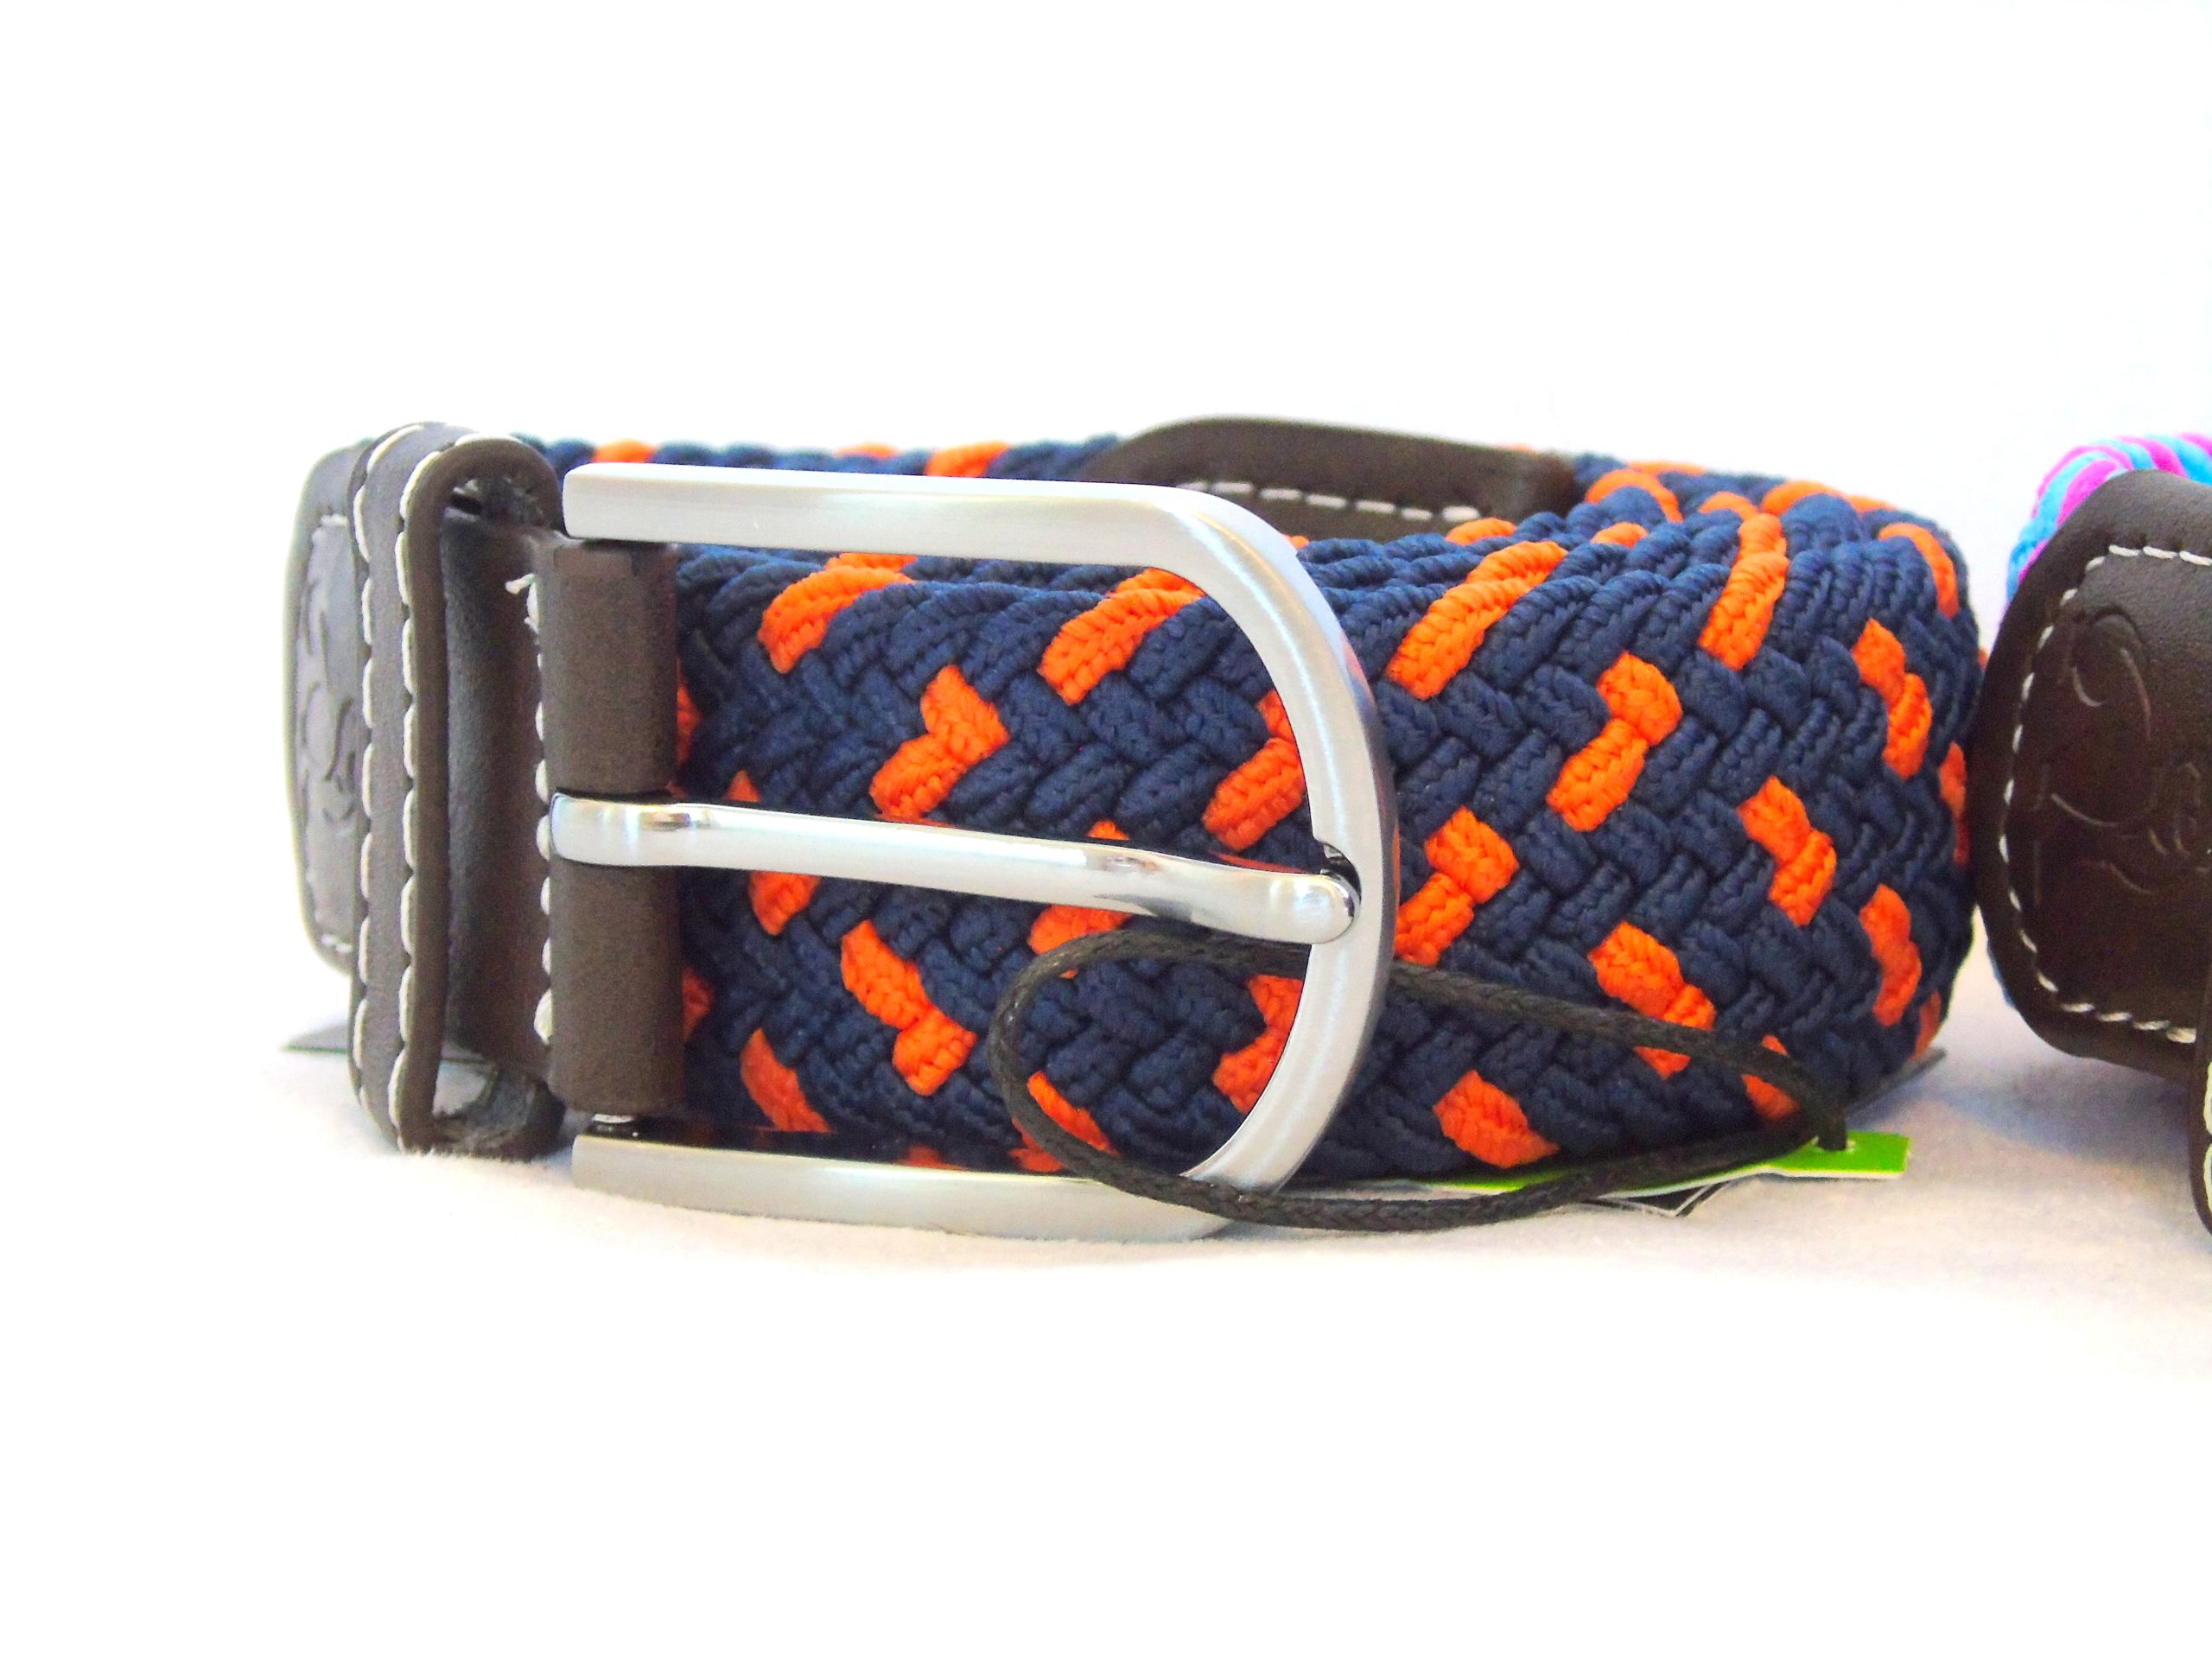 Swole Panda Recycled Woven Belt - County Clothes